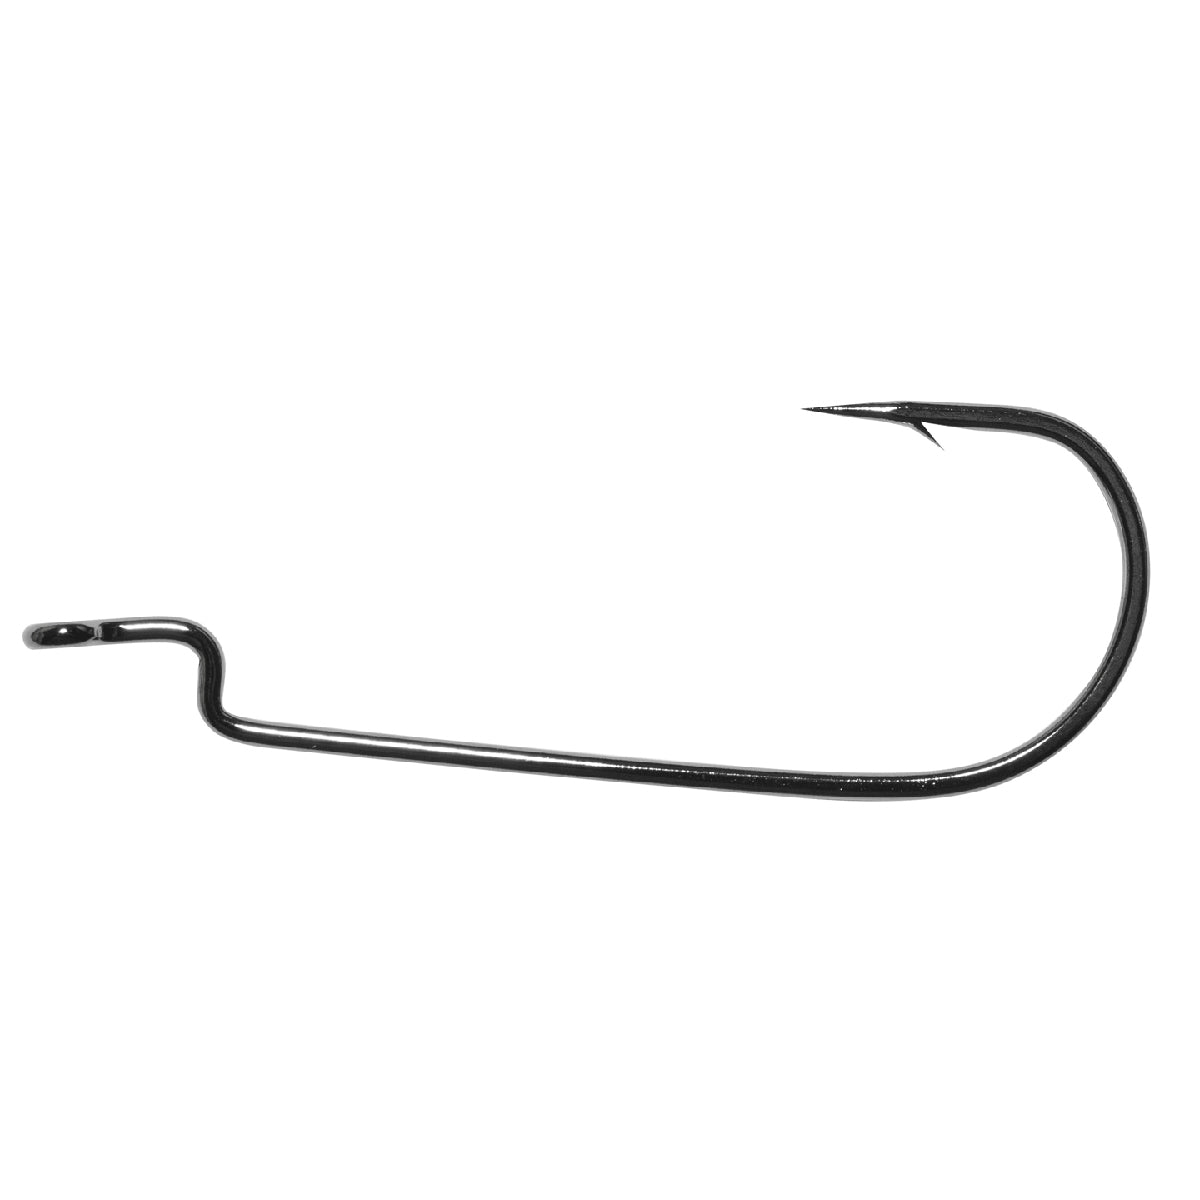 Terminal Tackle Offset Round Bend Worm Hooks